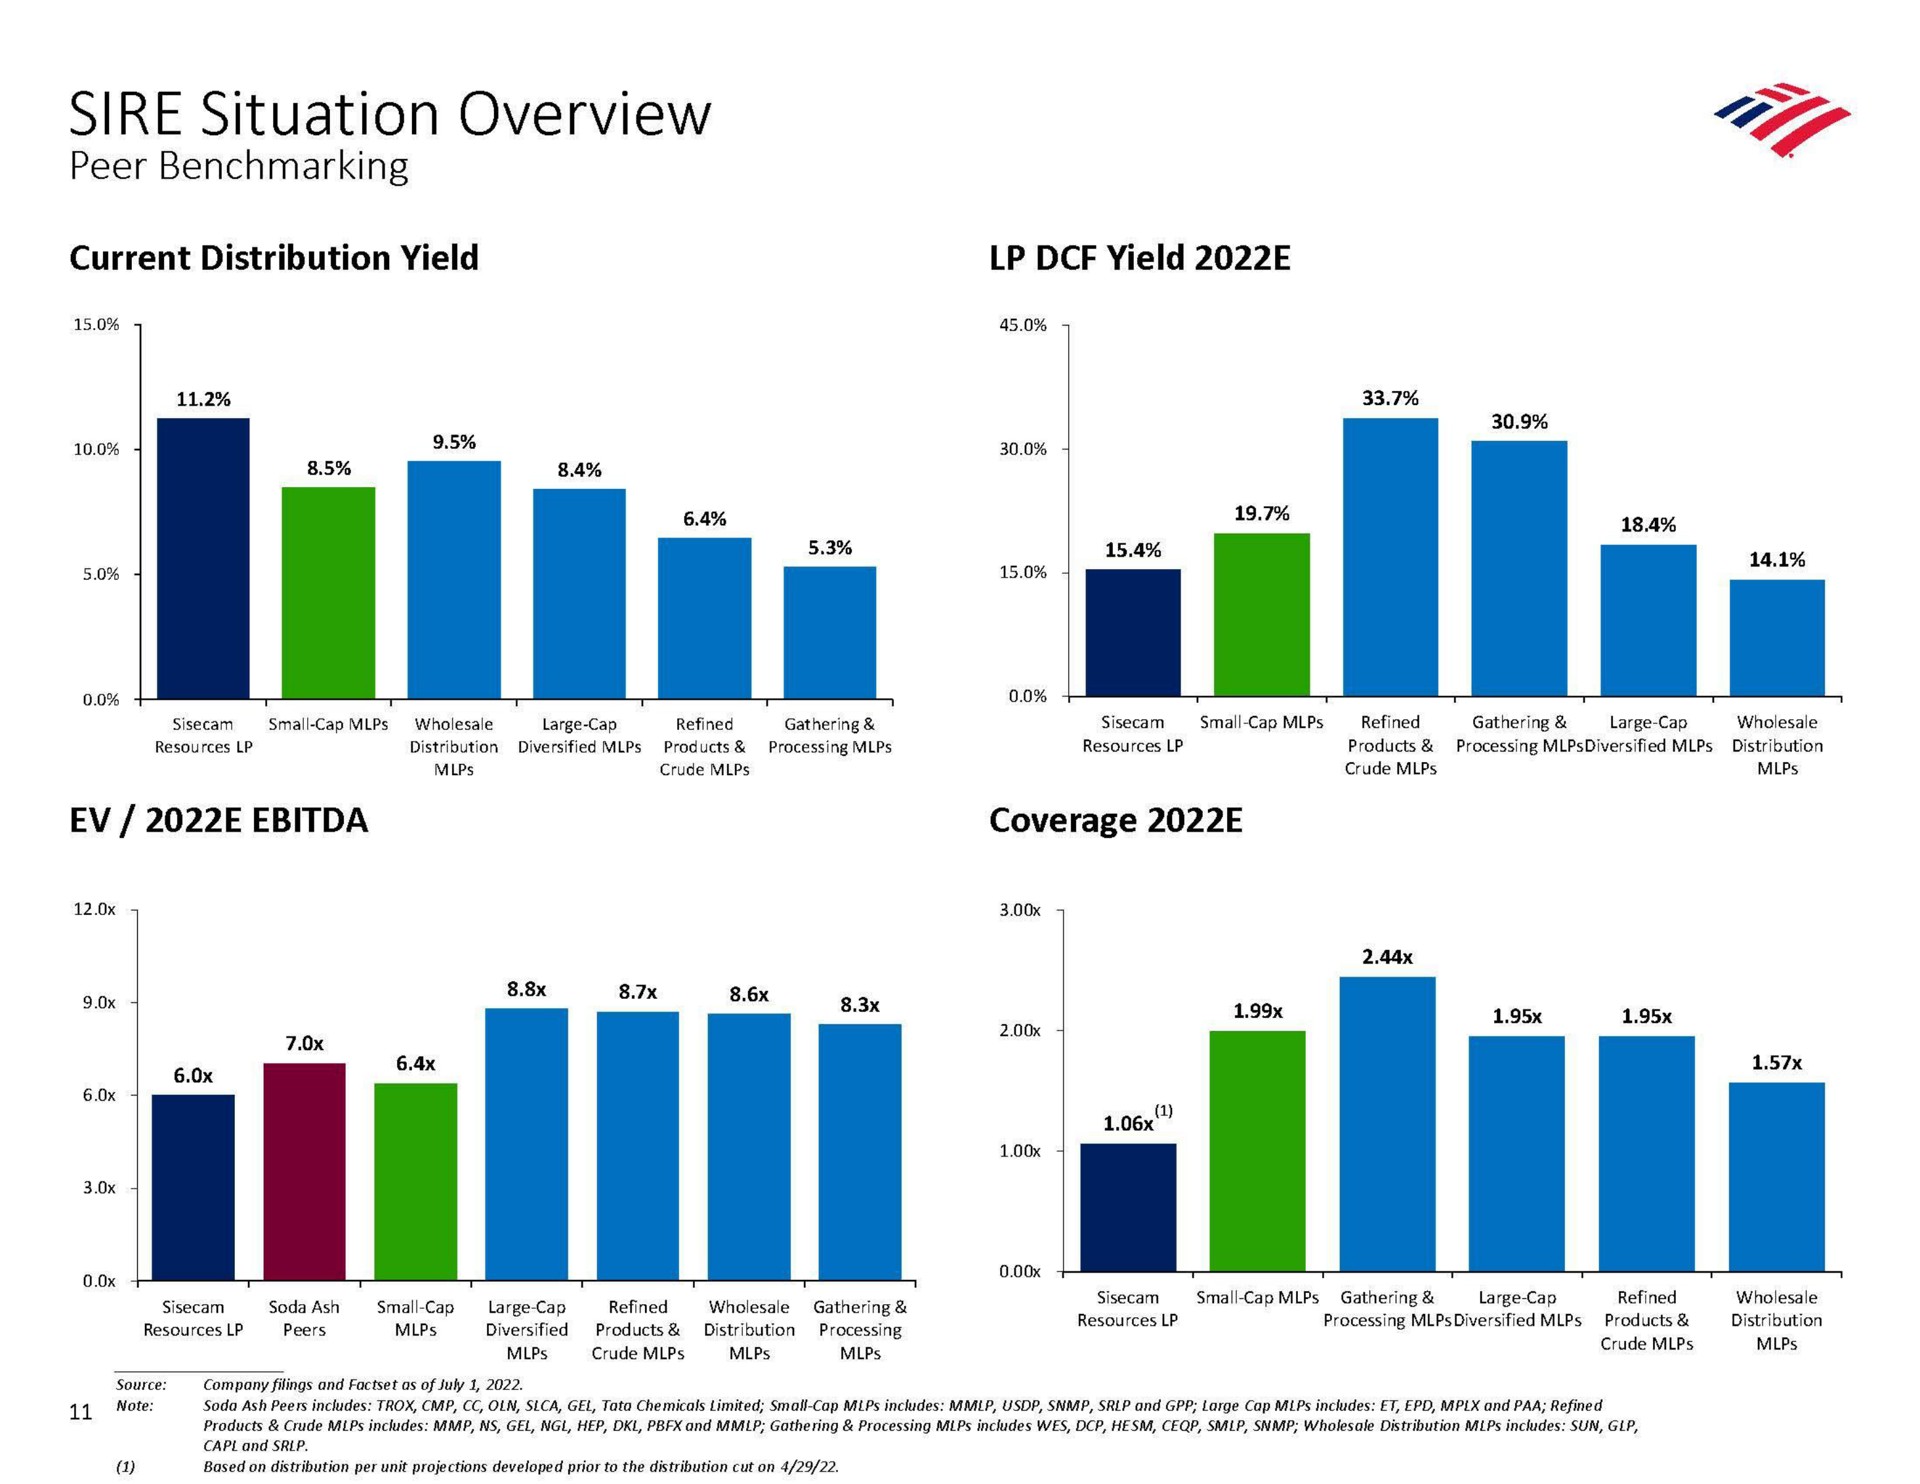 sire situation overview peer current distribution yield yield coverage | Bank of America